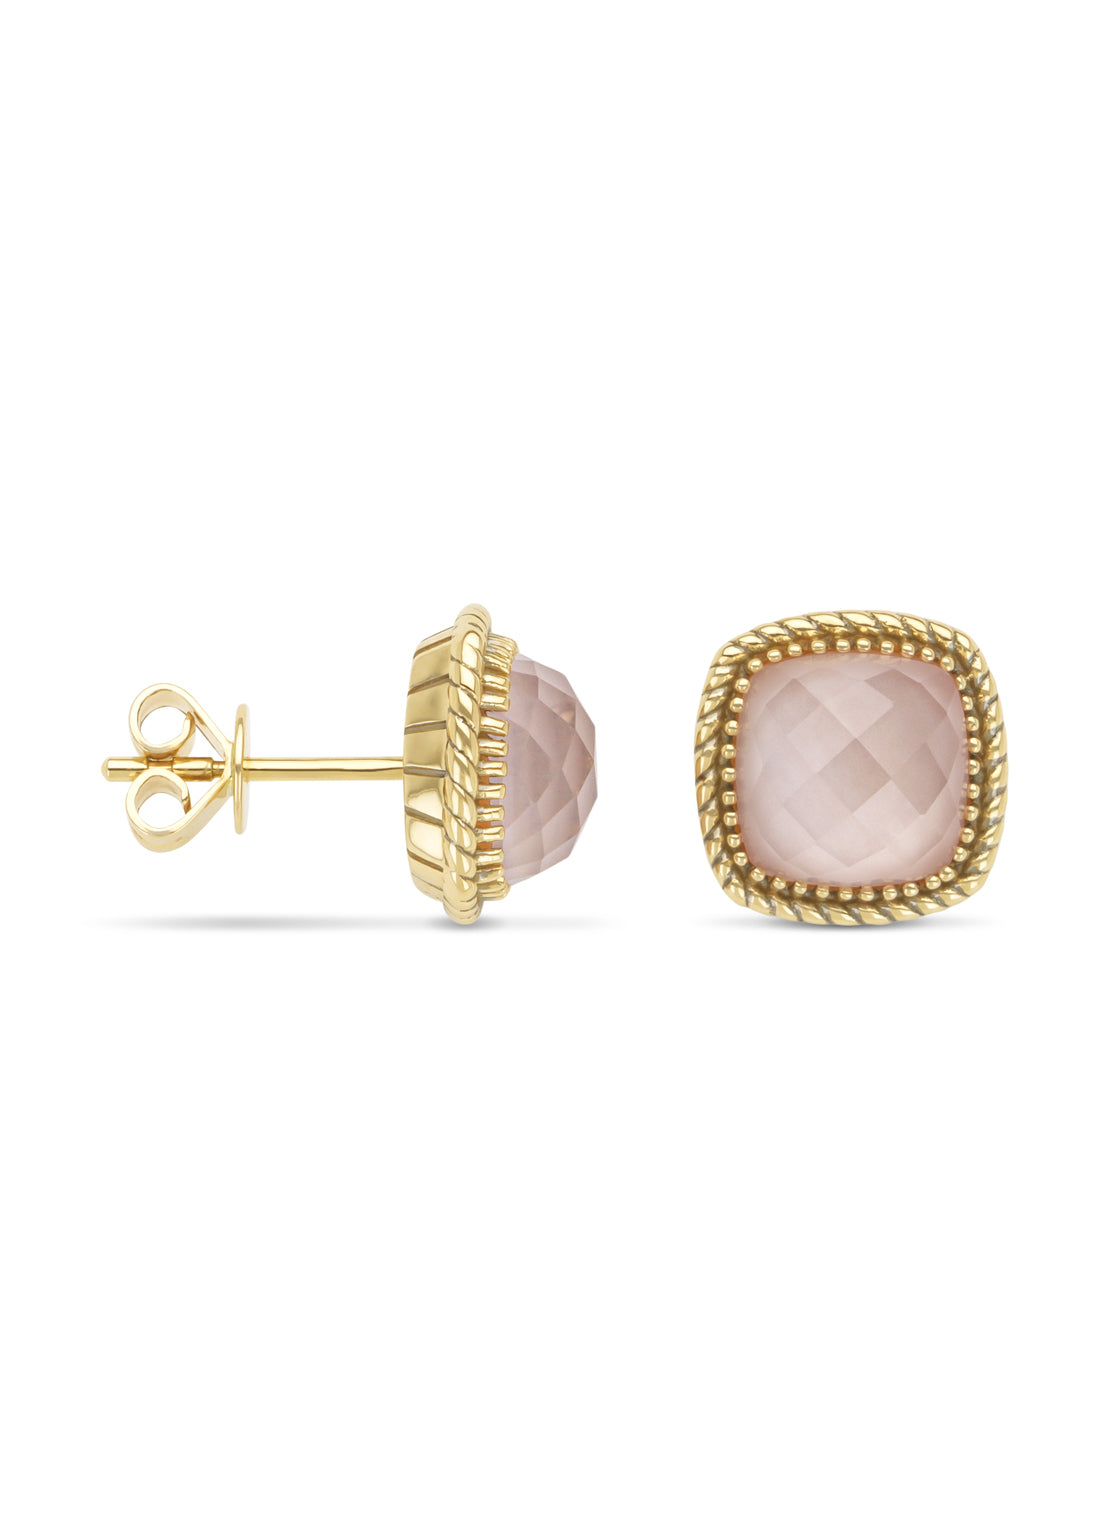 Yellow gold ear jewelry, 5.16 ct pink quartz with pare, velvet